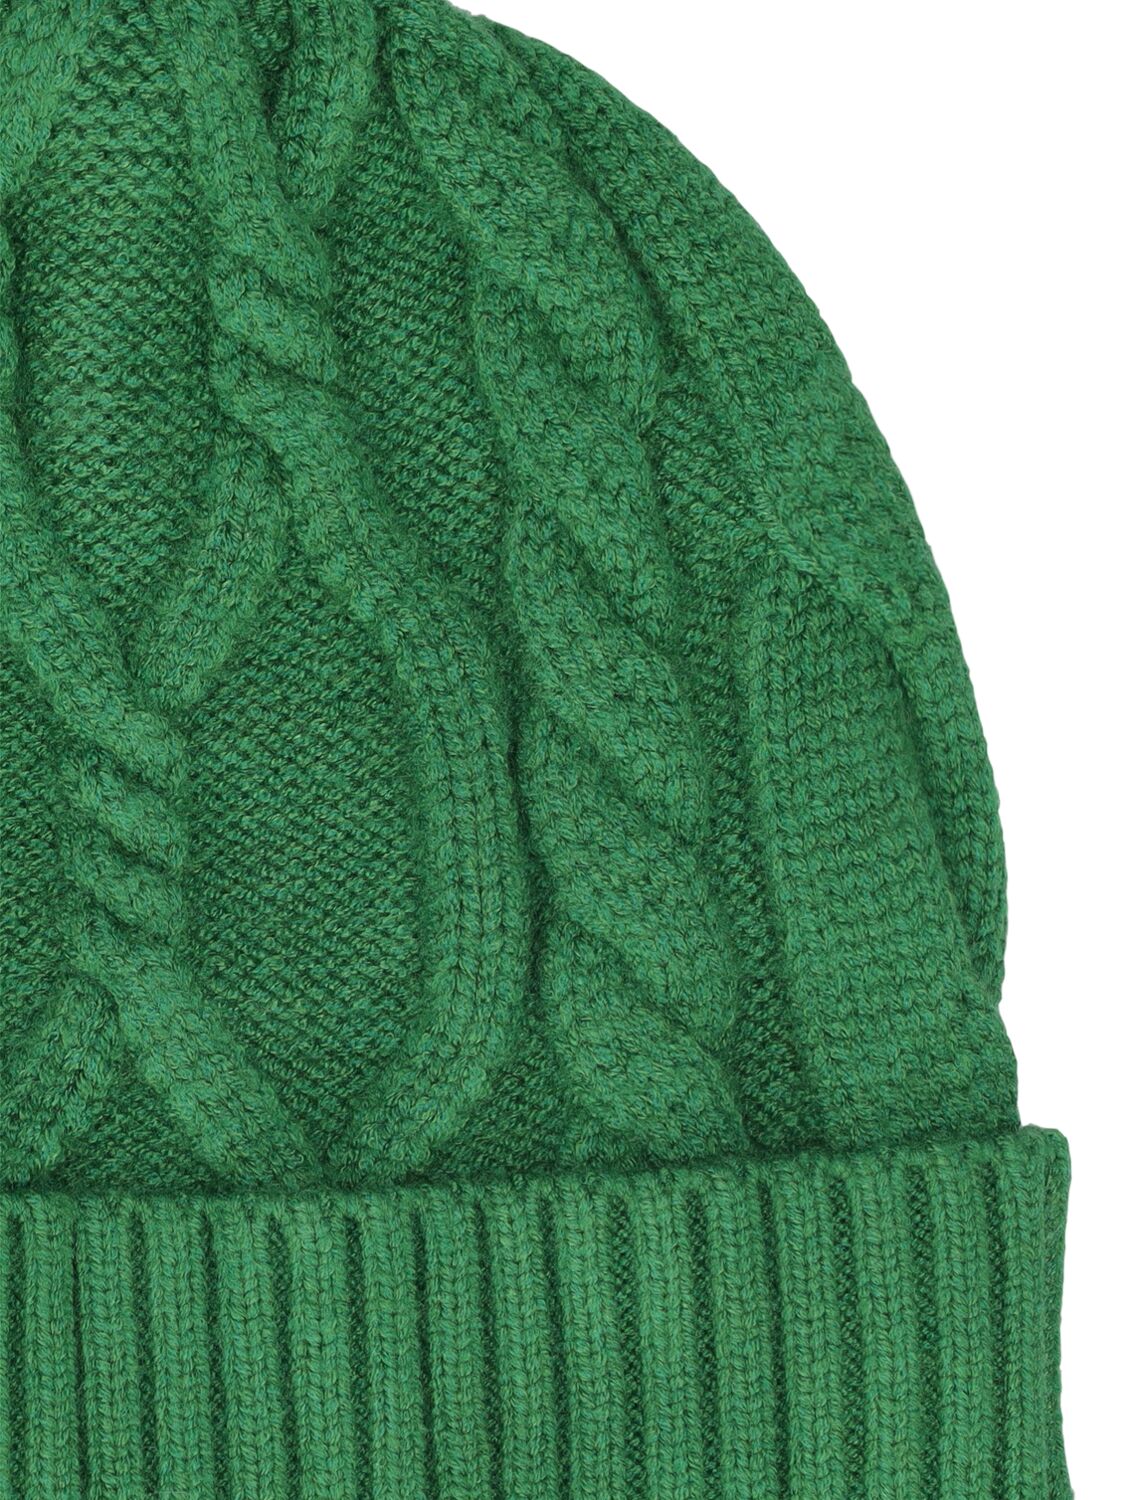 Shop Varley Chamond Cable Knit Beanie In Green